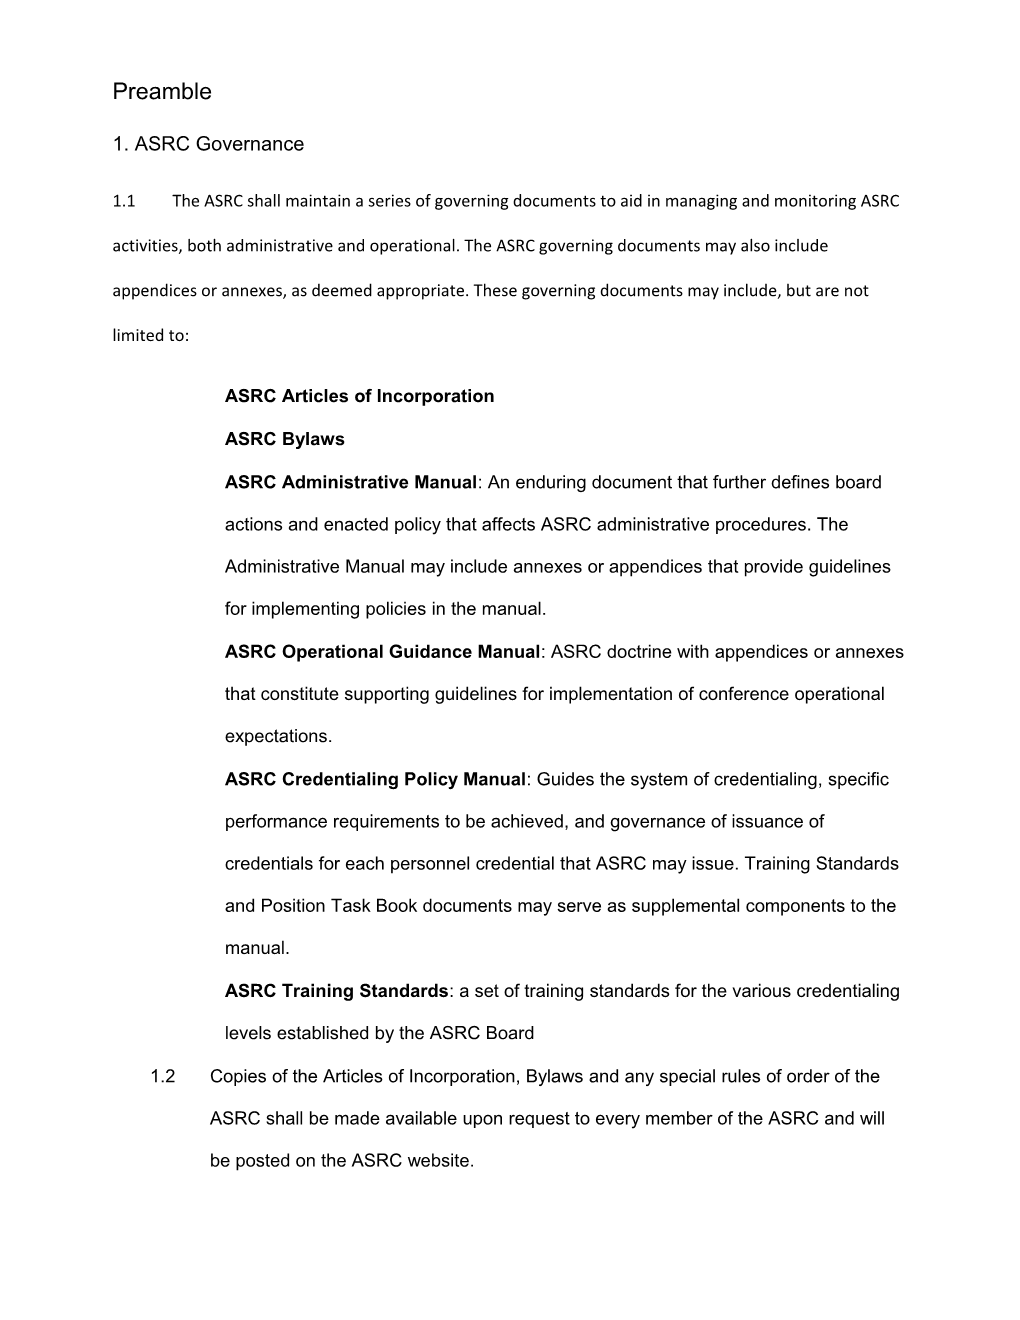 ASRC Articles of Incorporation